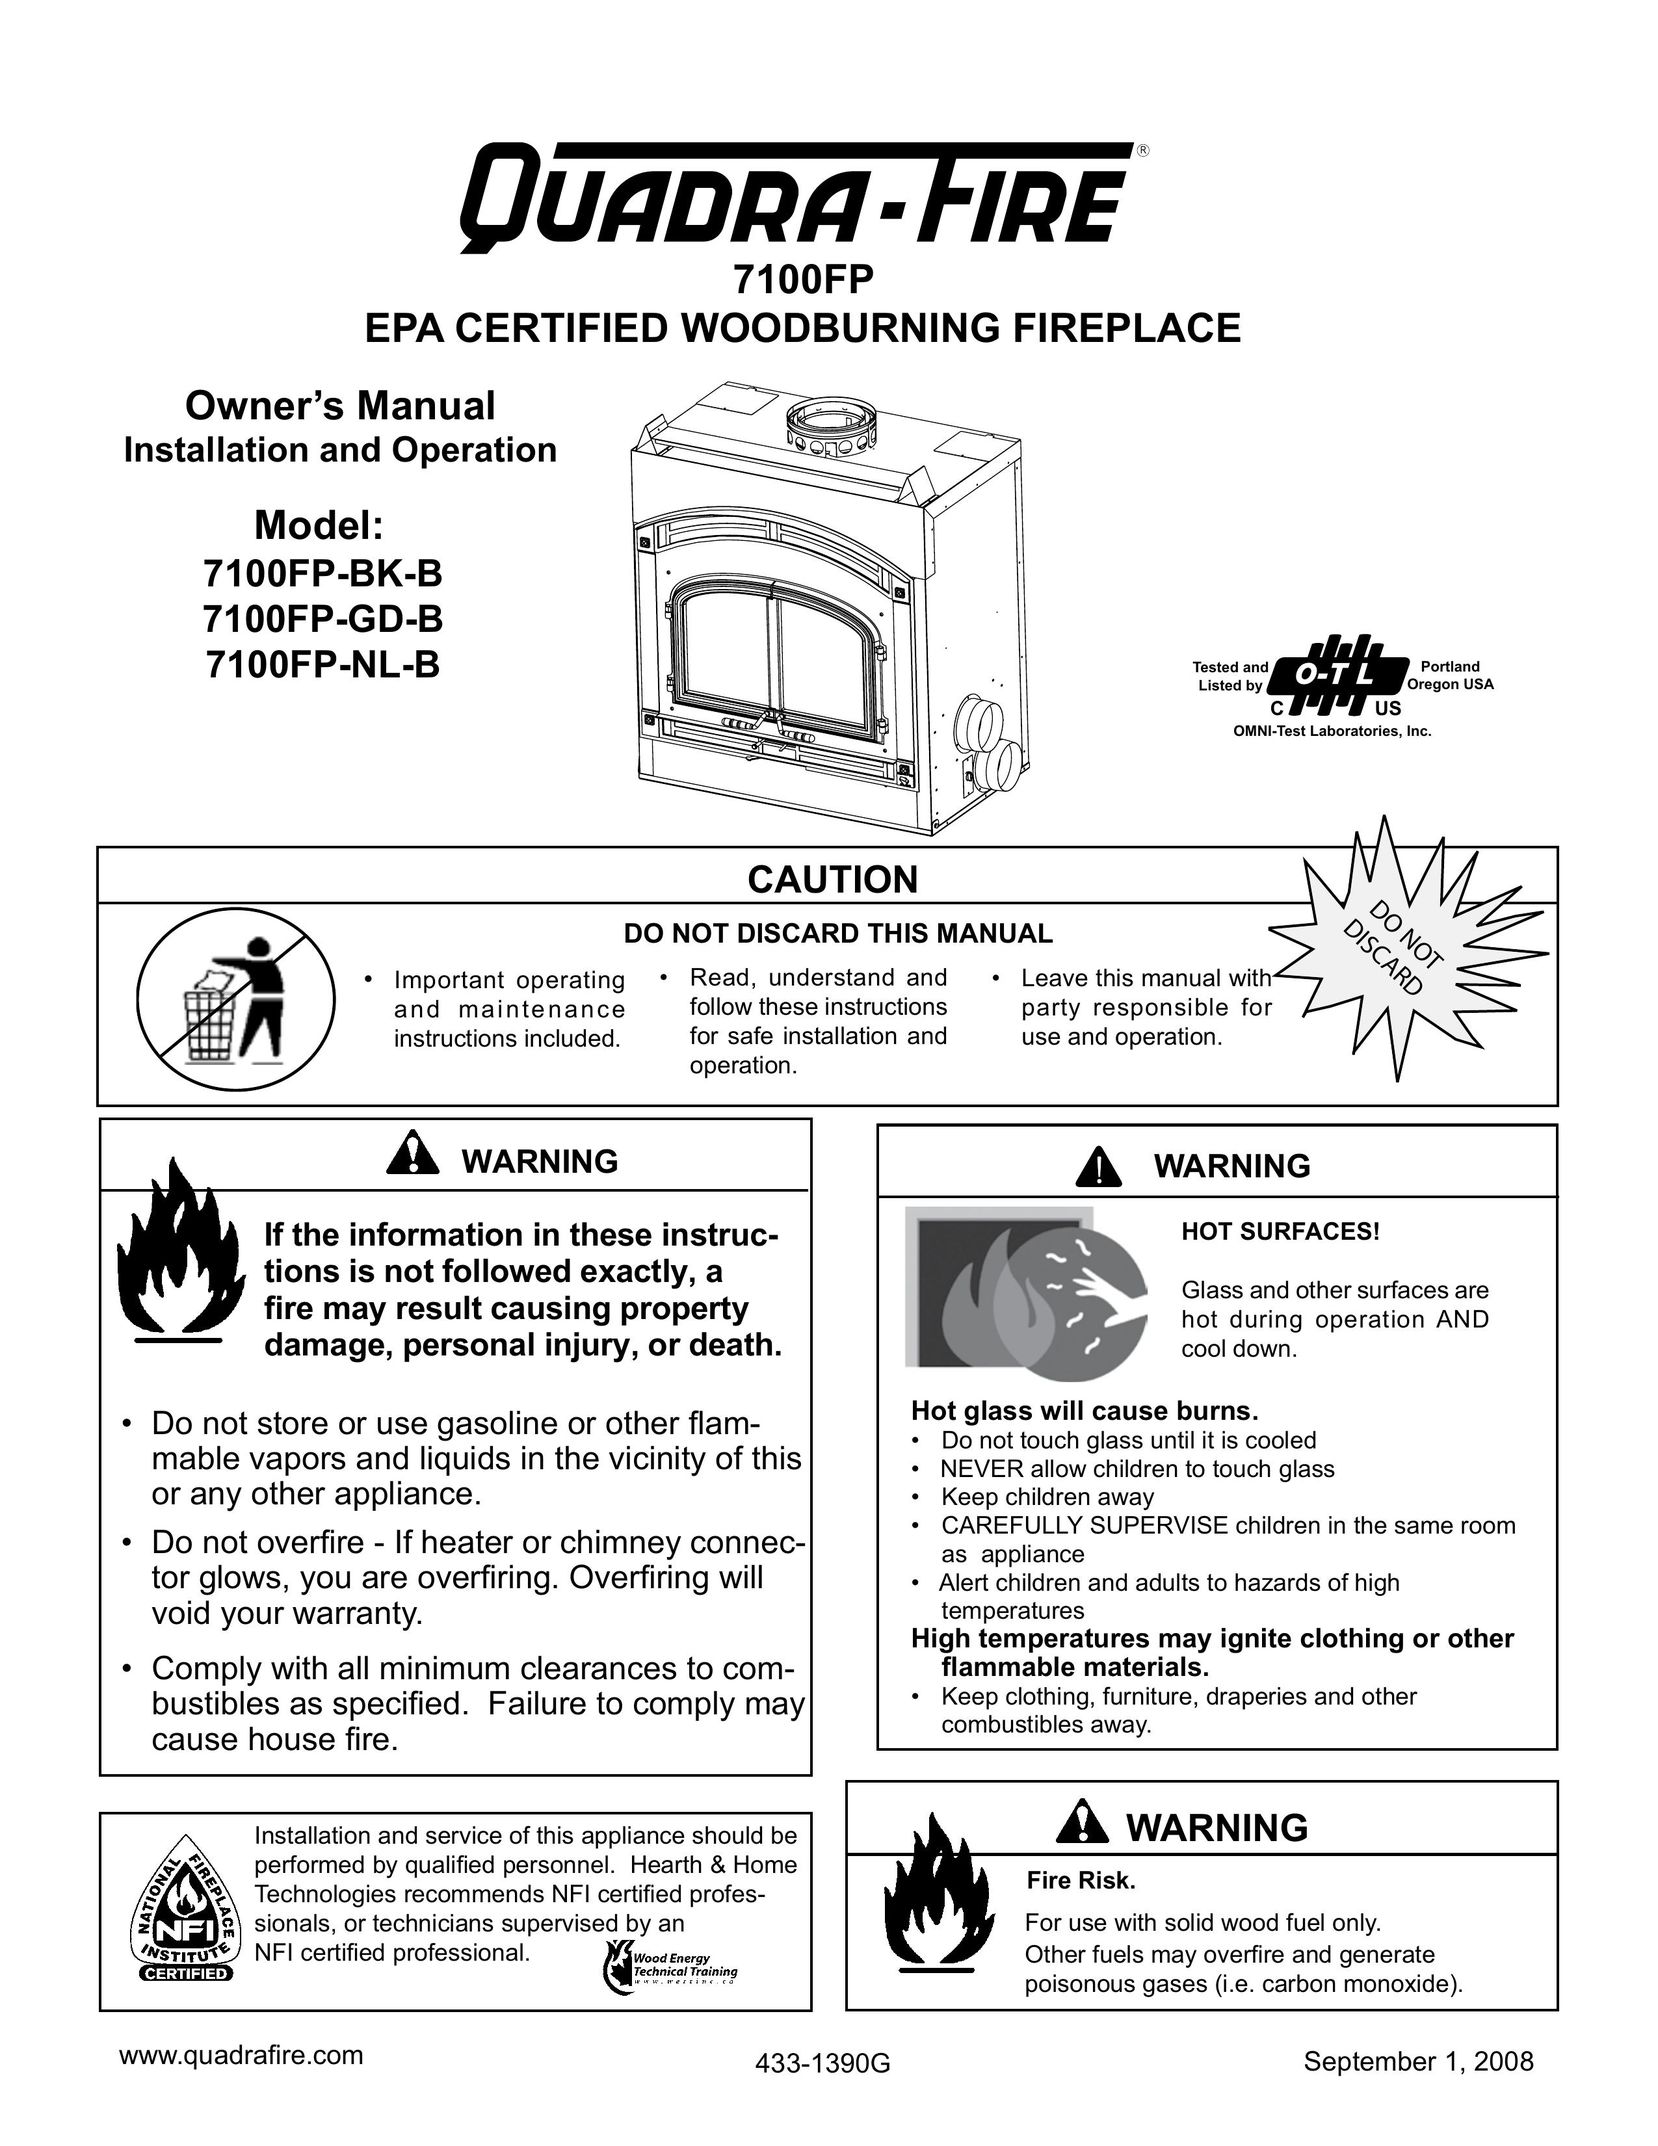 Hearth and Home Technologies 7100FP-GD-B Indoor Fireplace User Manual